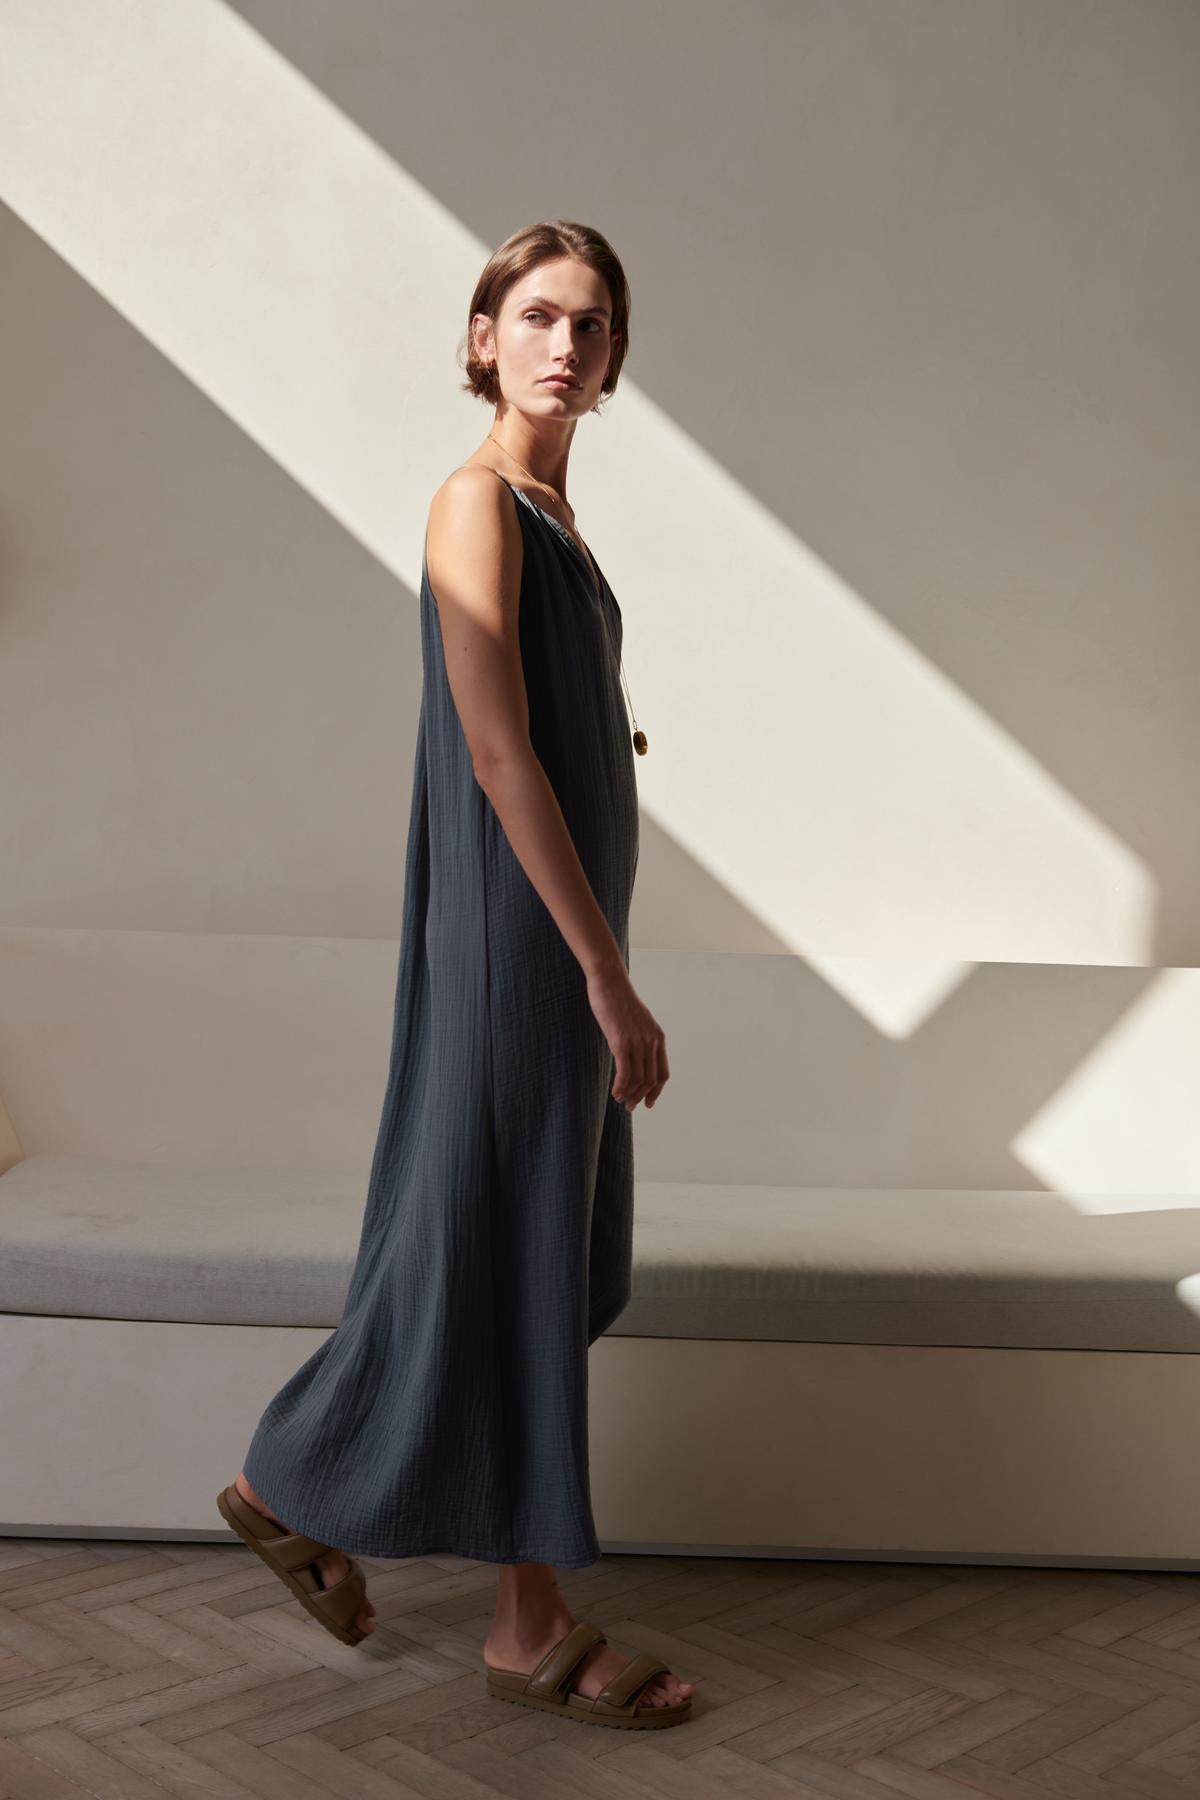 A woman in a blue cotton gauze Carrillo Dress by Velvet by Jenny Graham stands in a sunlit room with diagonal light patterns on the wall, looking thoughtfully to the side.-26293220114625